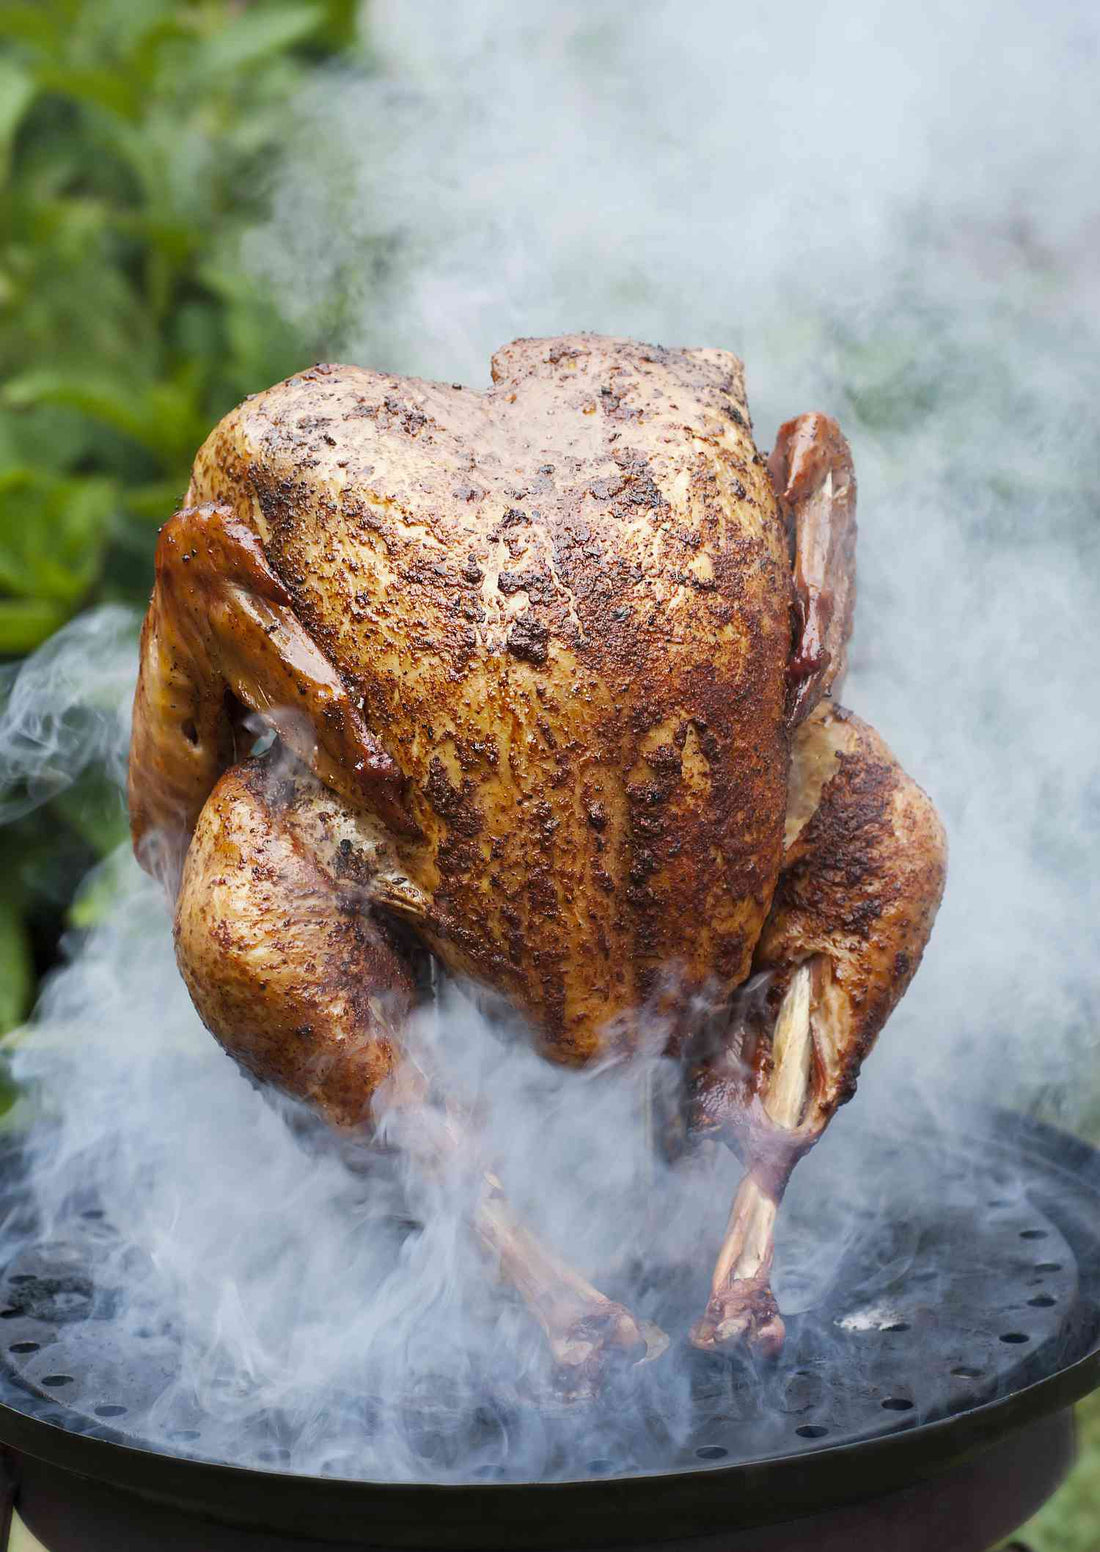 Tired of the Same Old Roasted Turkey? Try This Smoked Jerk Turkey Recipe Instead.